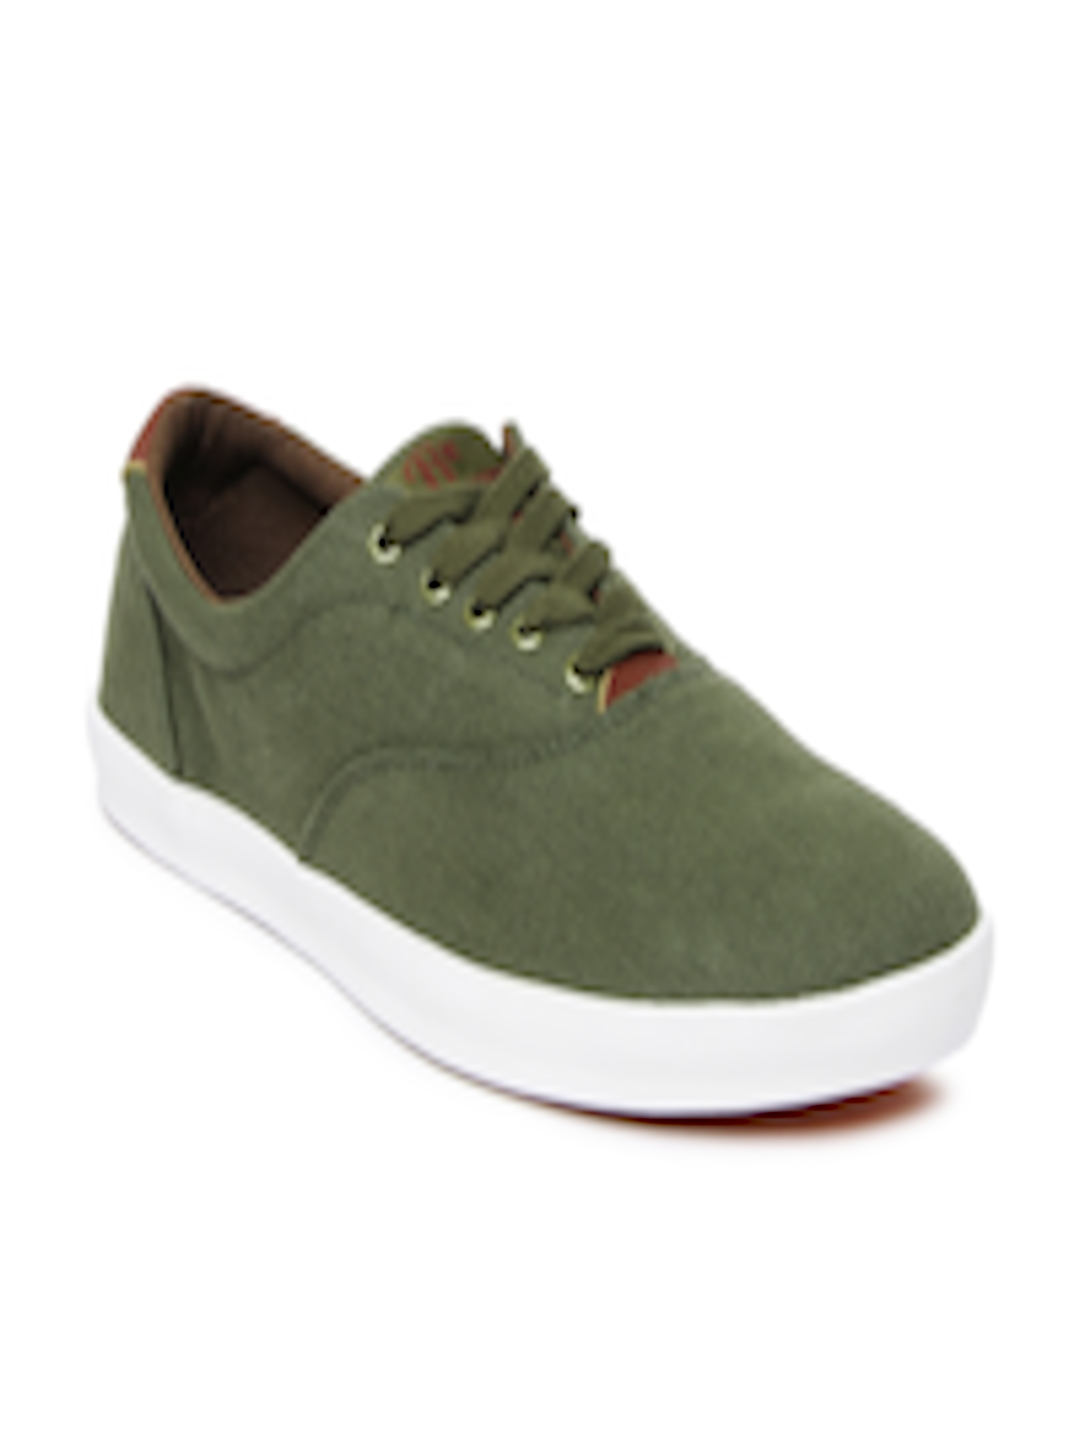 Buy Roadster Men Olive Green Casual Shoes - Casual Shoes for Men 479826 ...